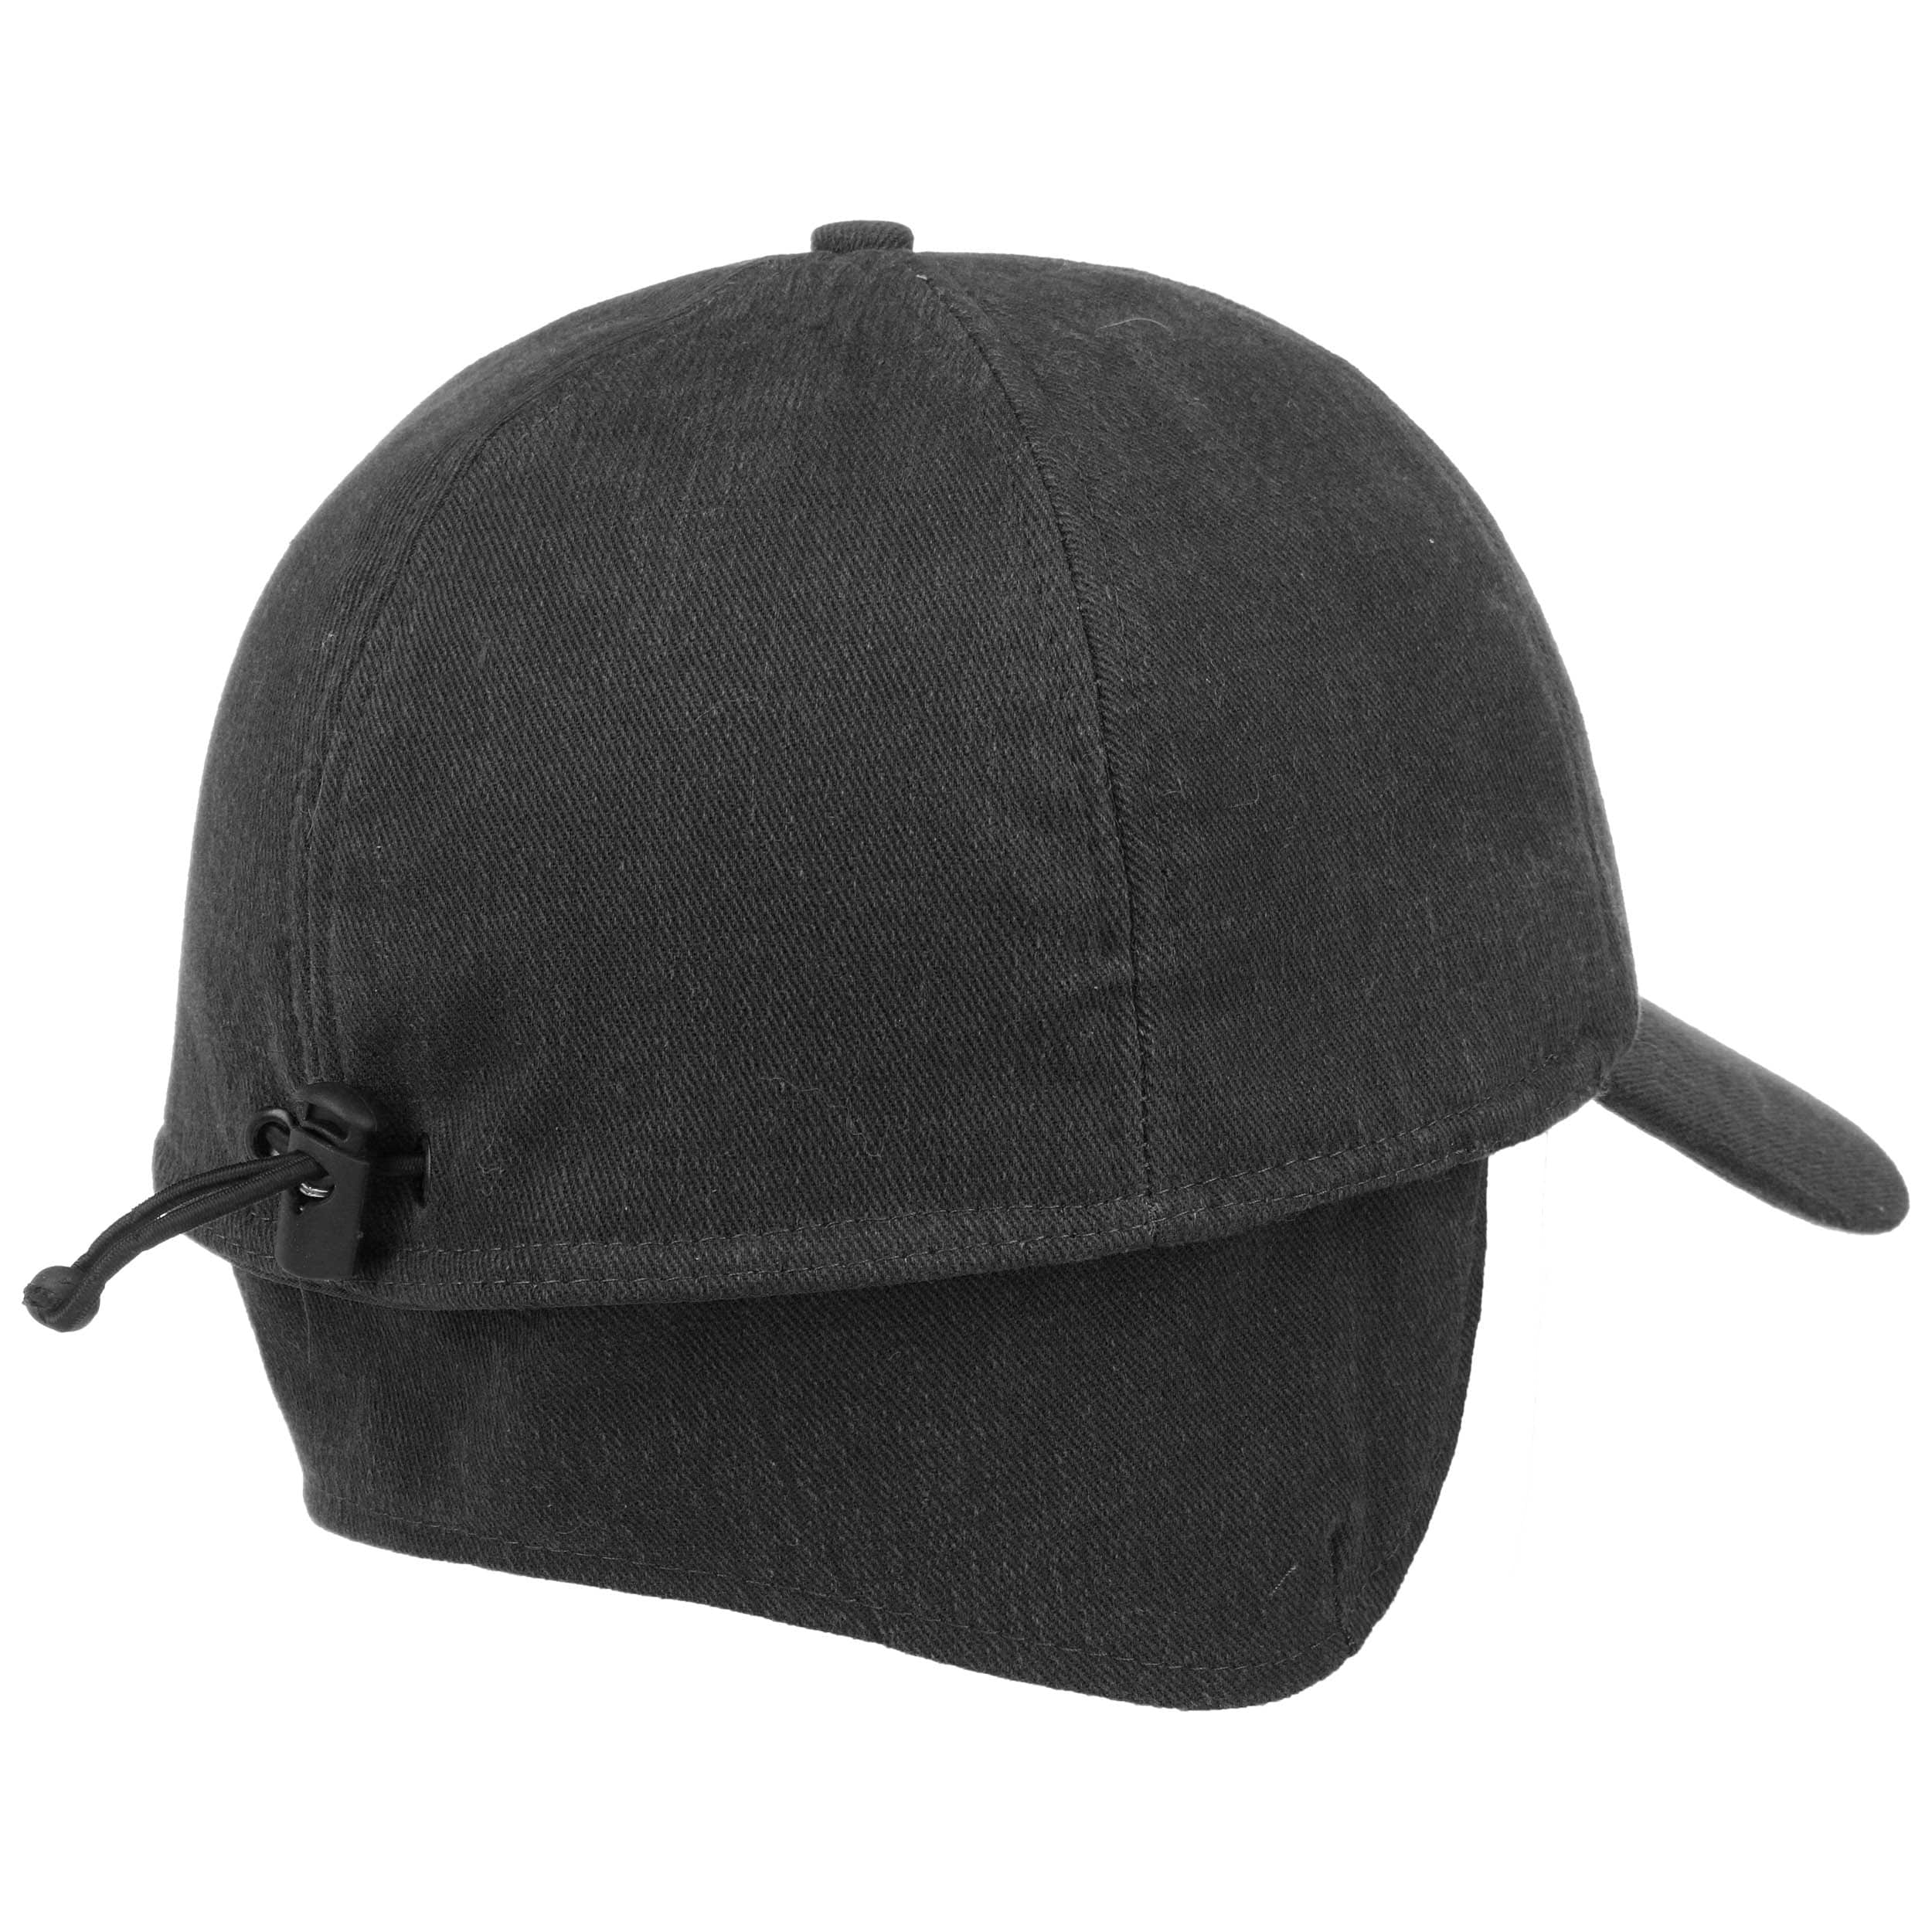 Thinsulate Cap mit Ohrenklappen by Lipodo - 24,95 €